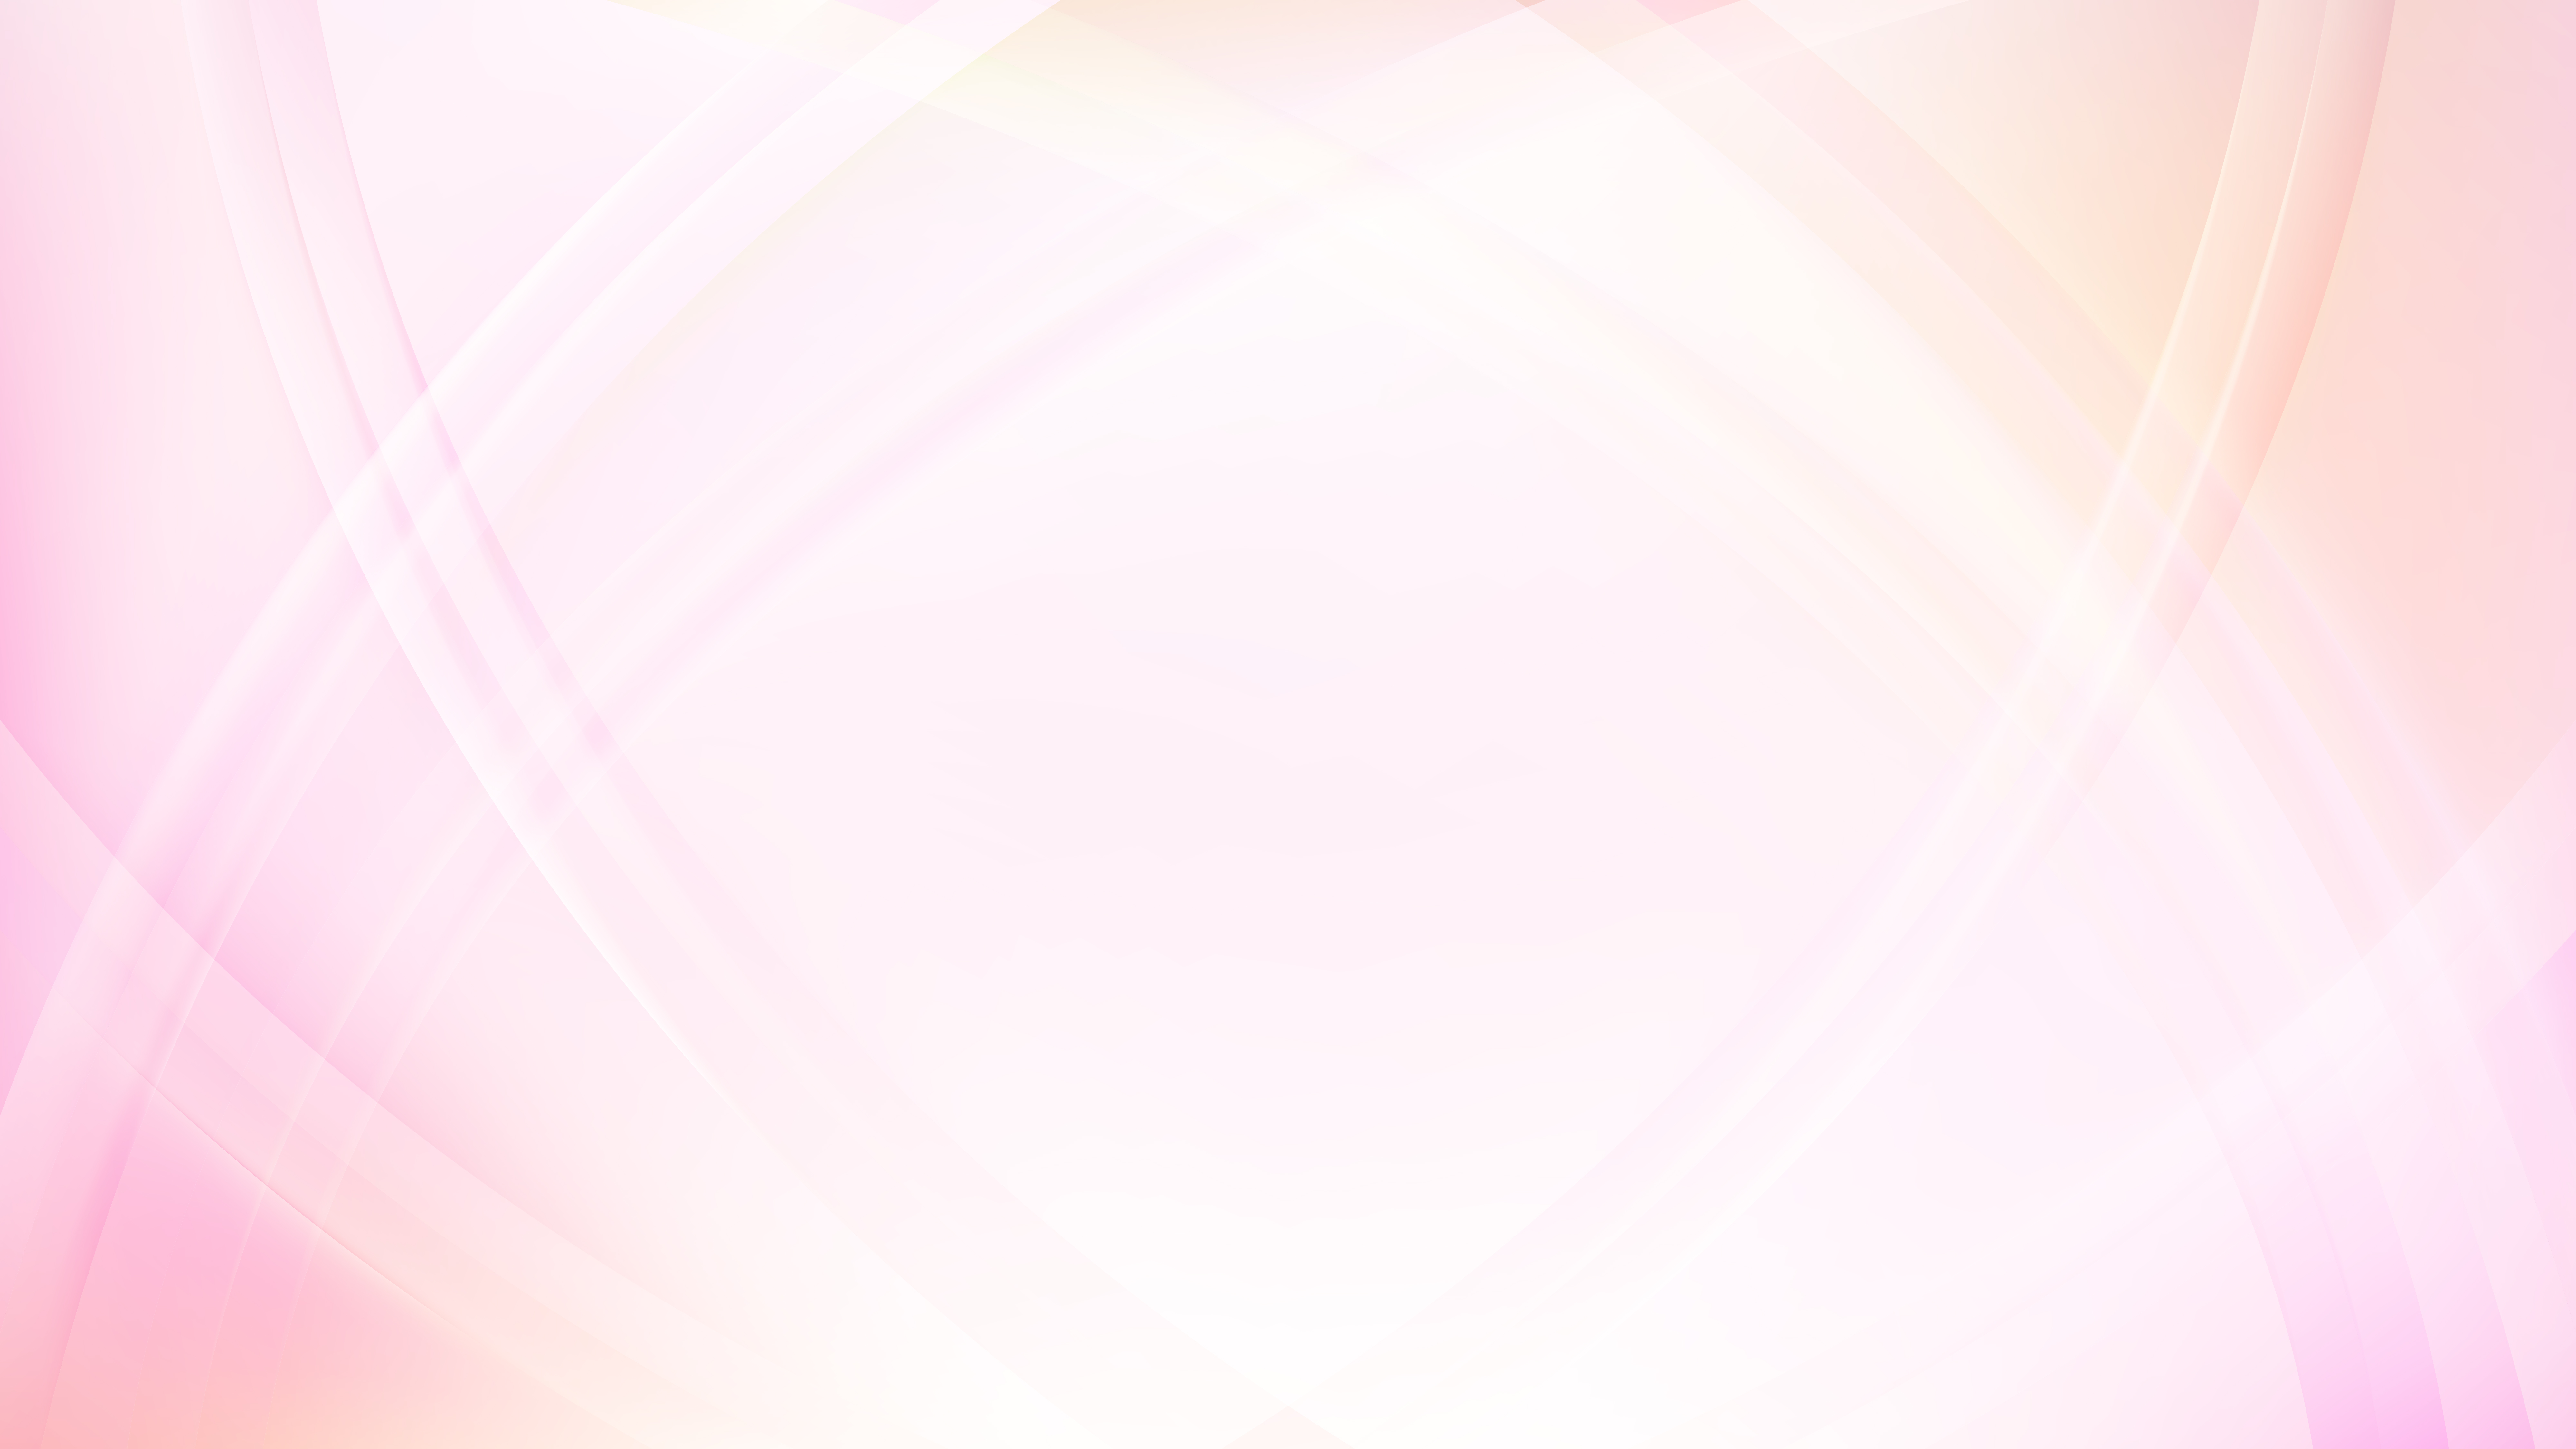 Free Abstract Light Pink Curved Background Vector Image